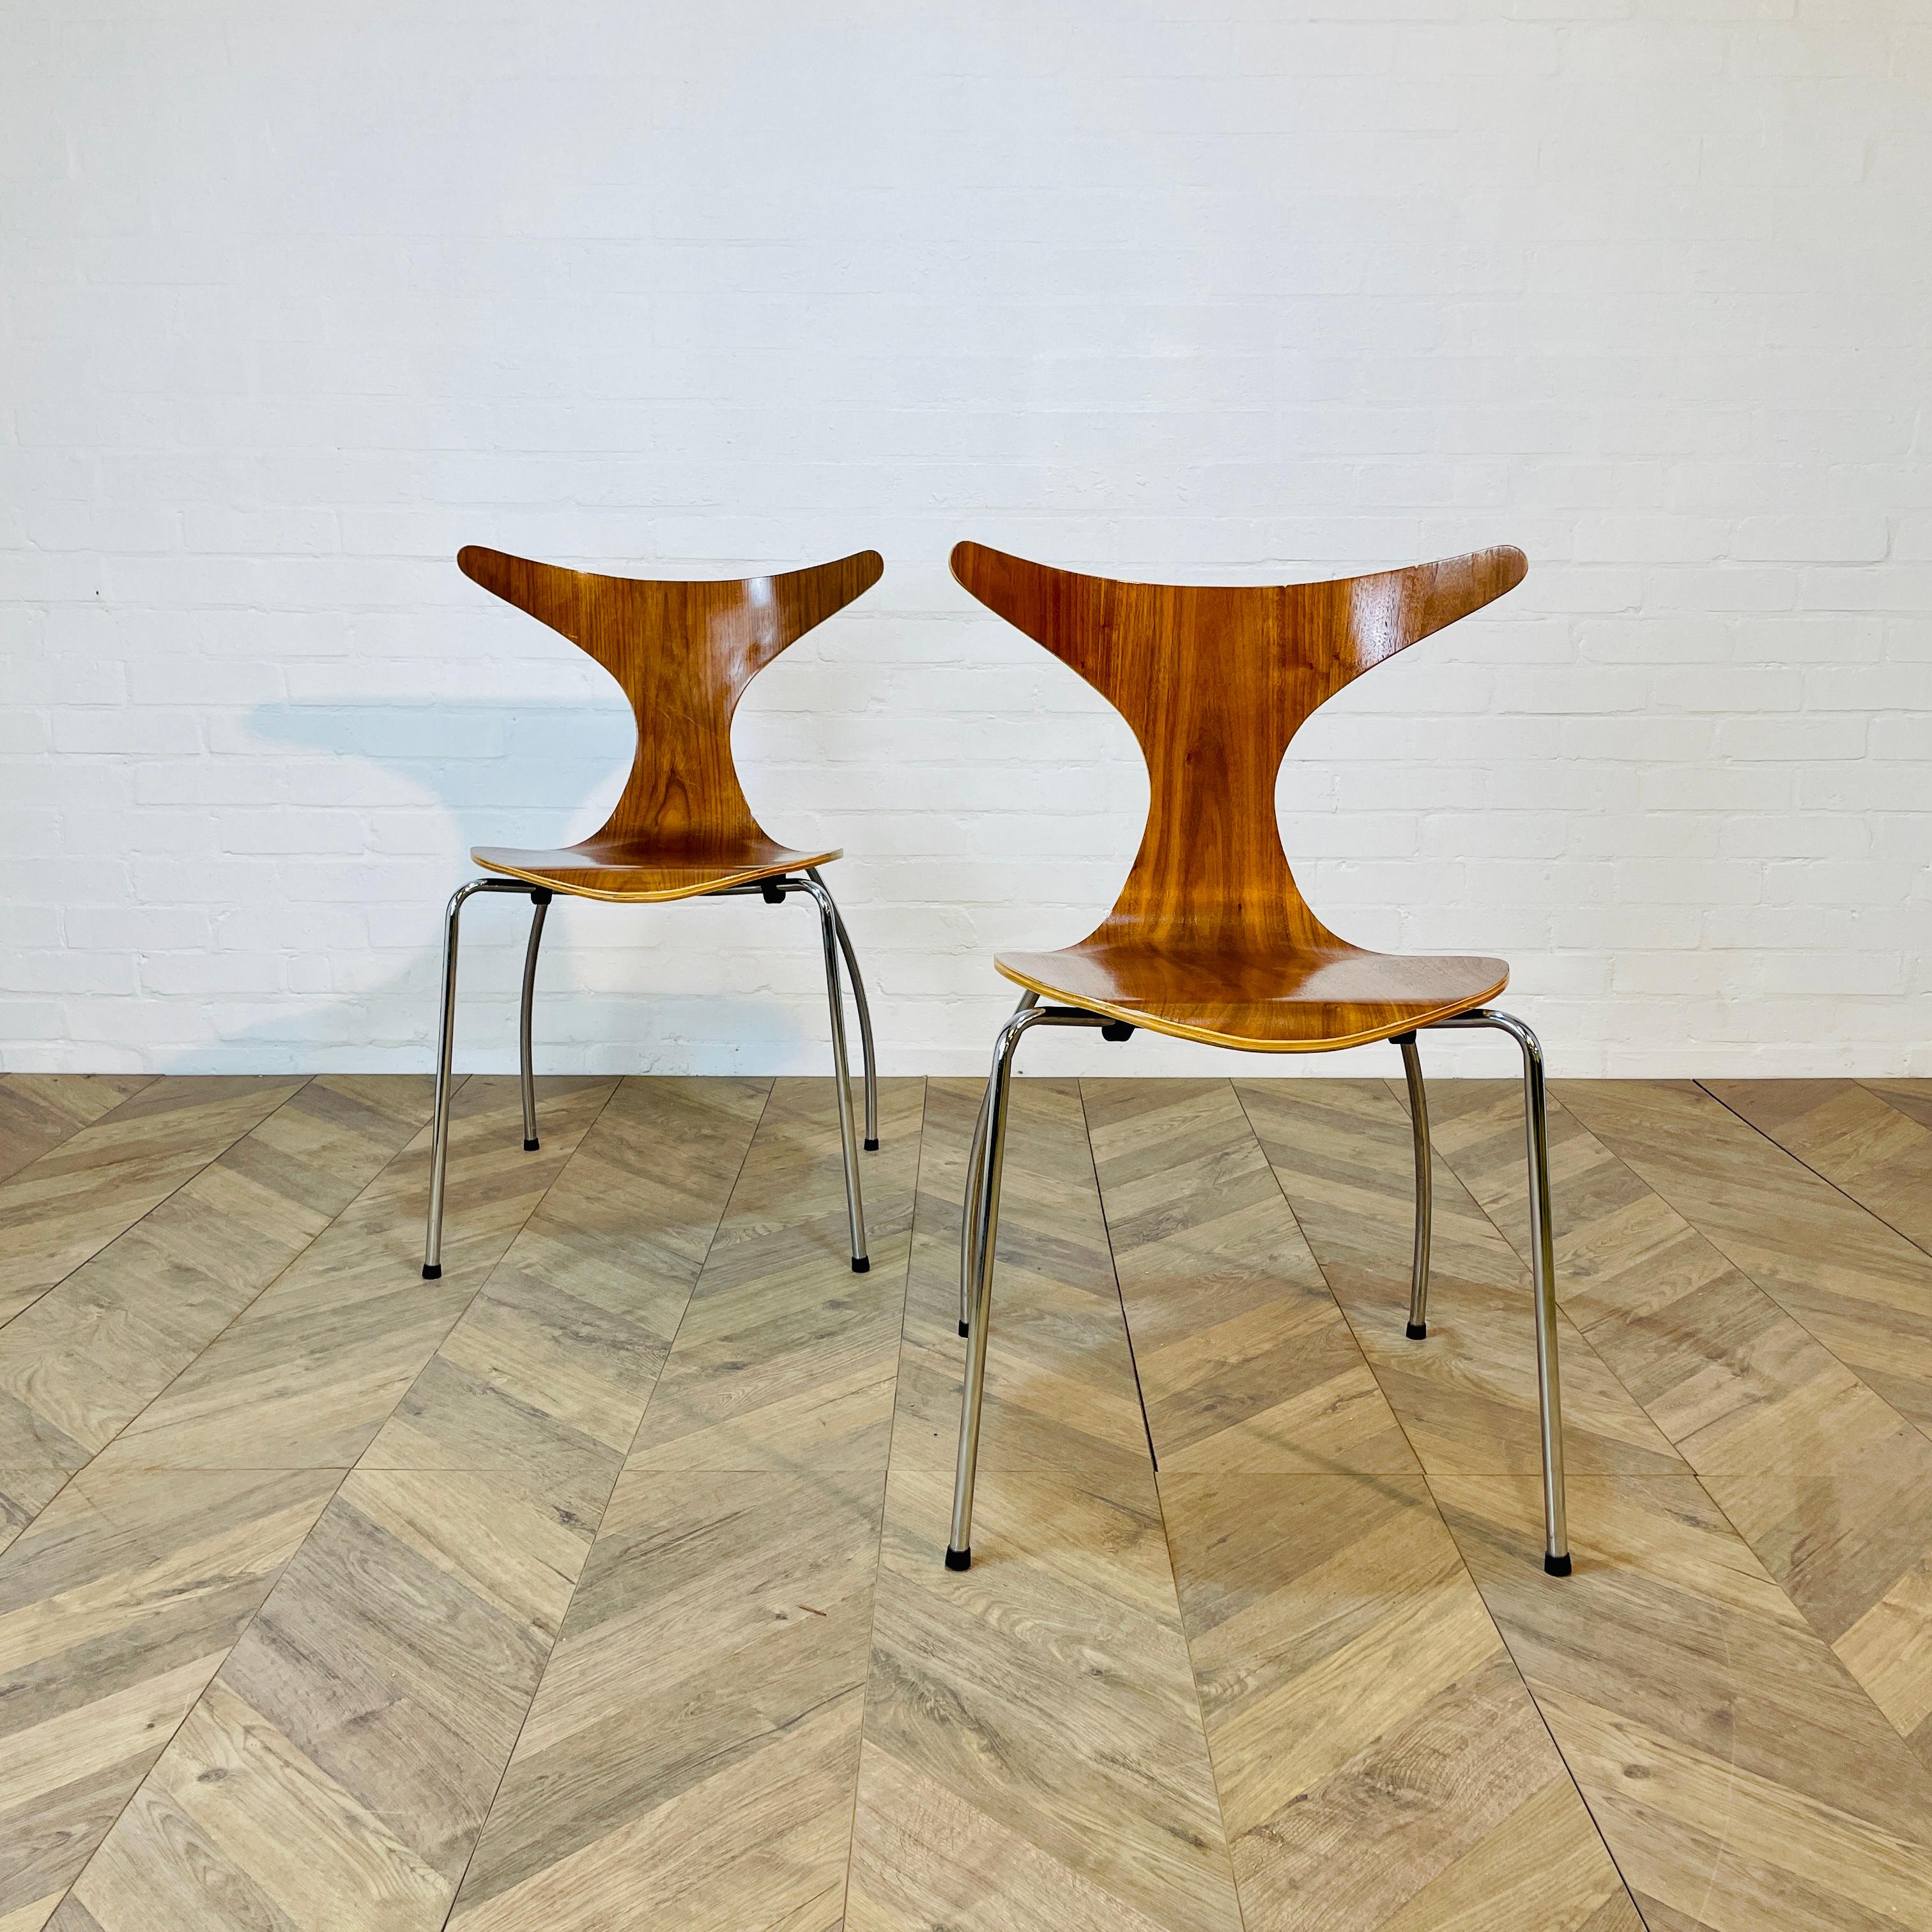 Walnut Vintage Pair of 'Dolphin' Stacking Chairs by Bjarke Nielsen for Dan-Form Denmark For Sale